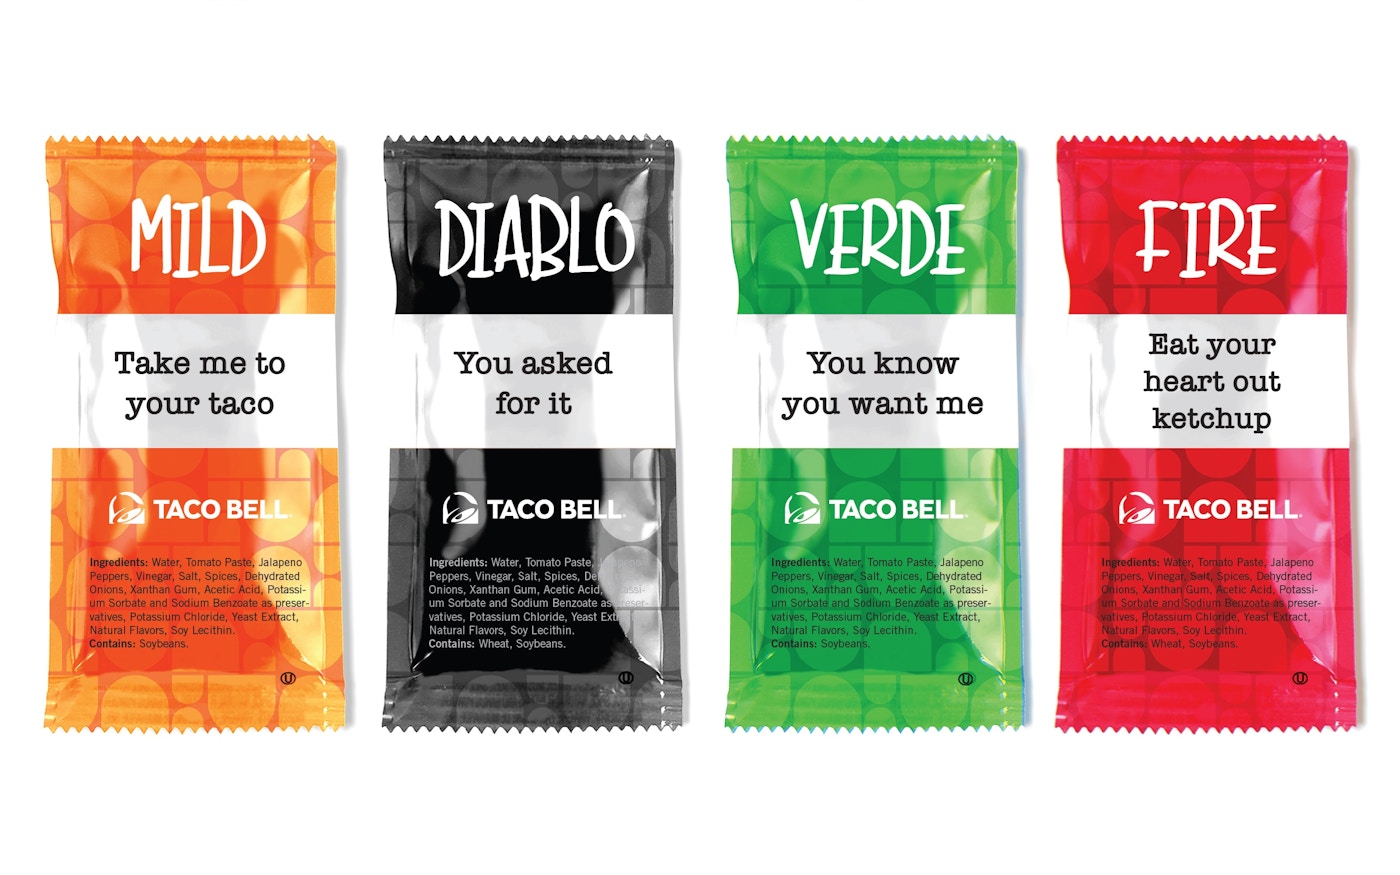 Taco Bell sauces with new branding